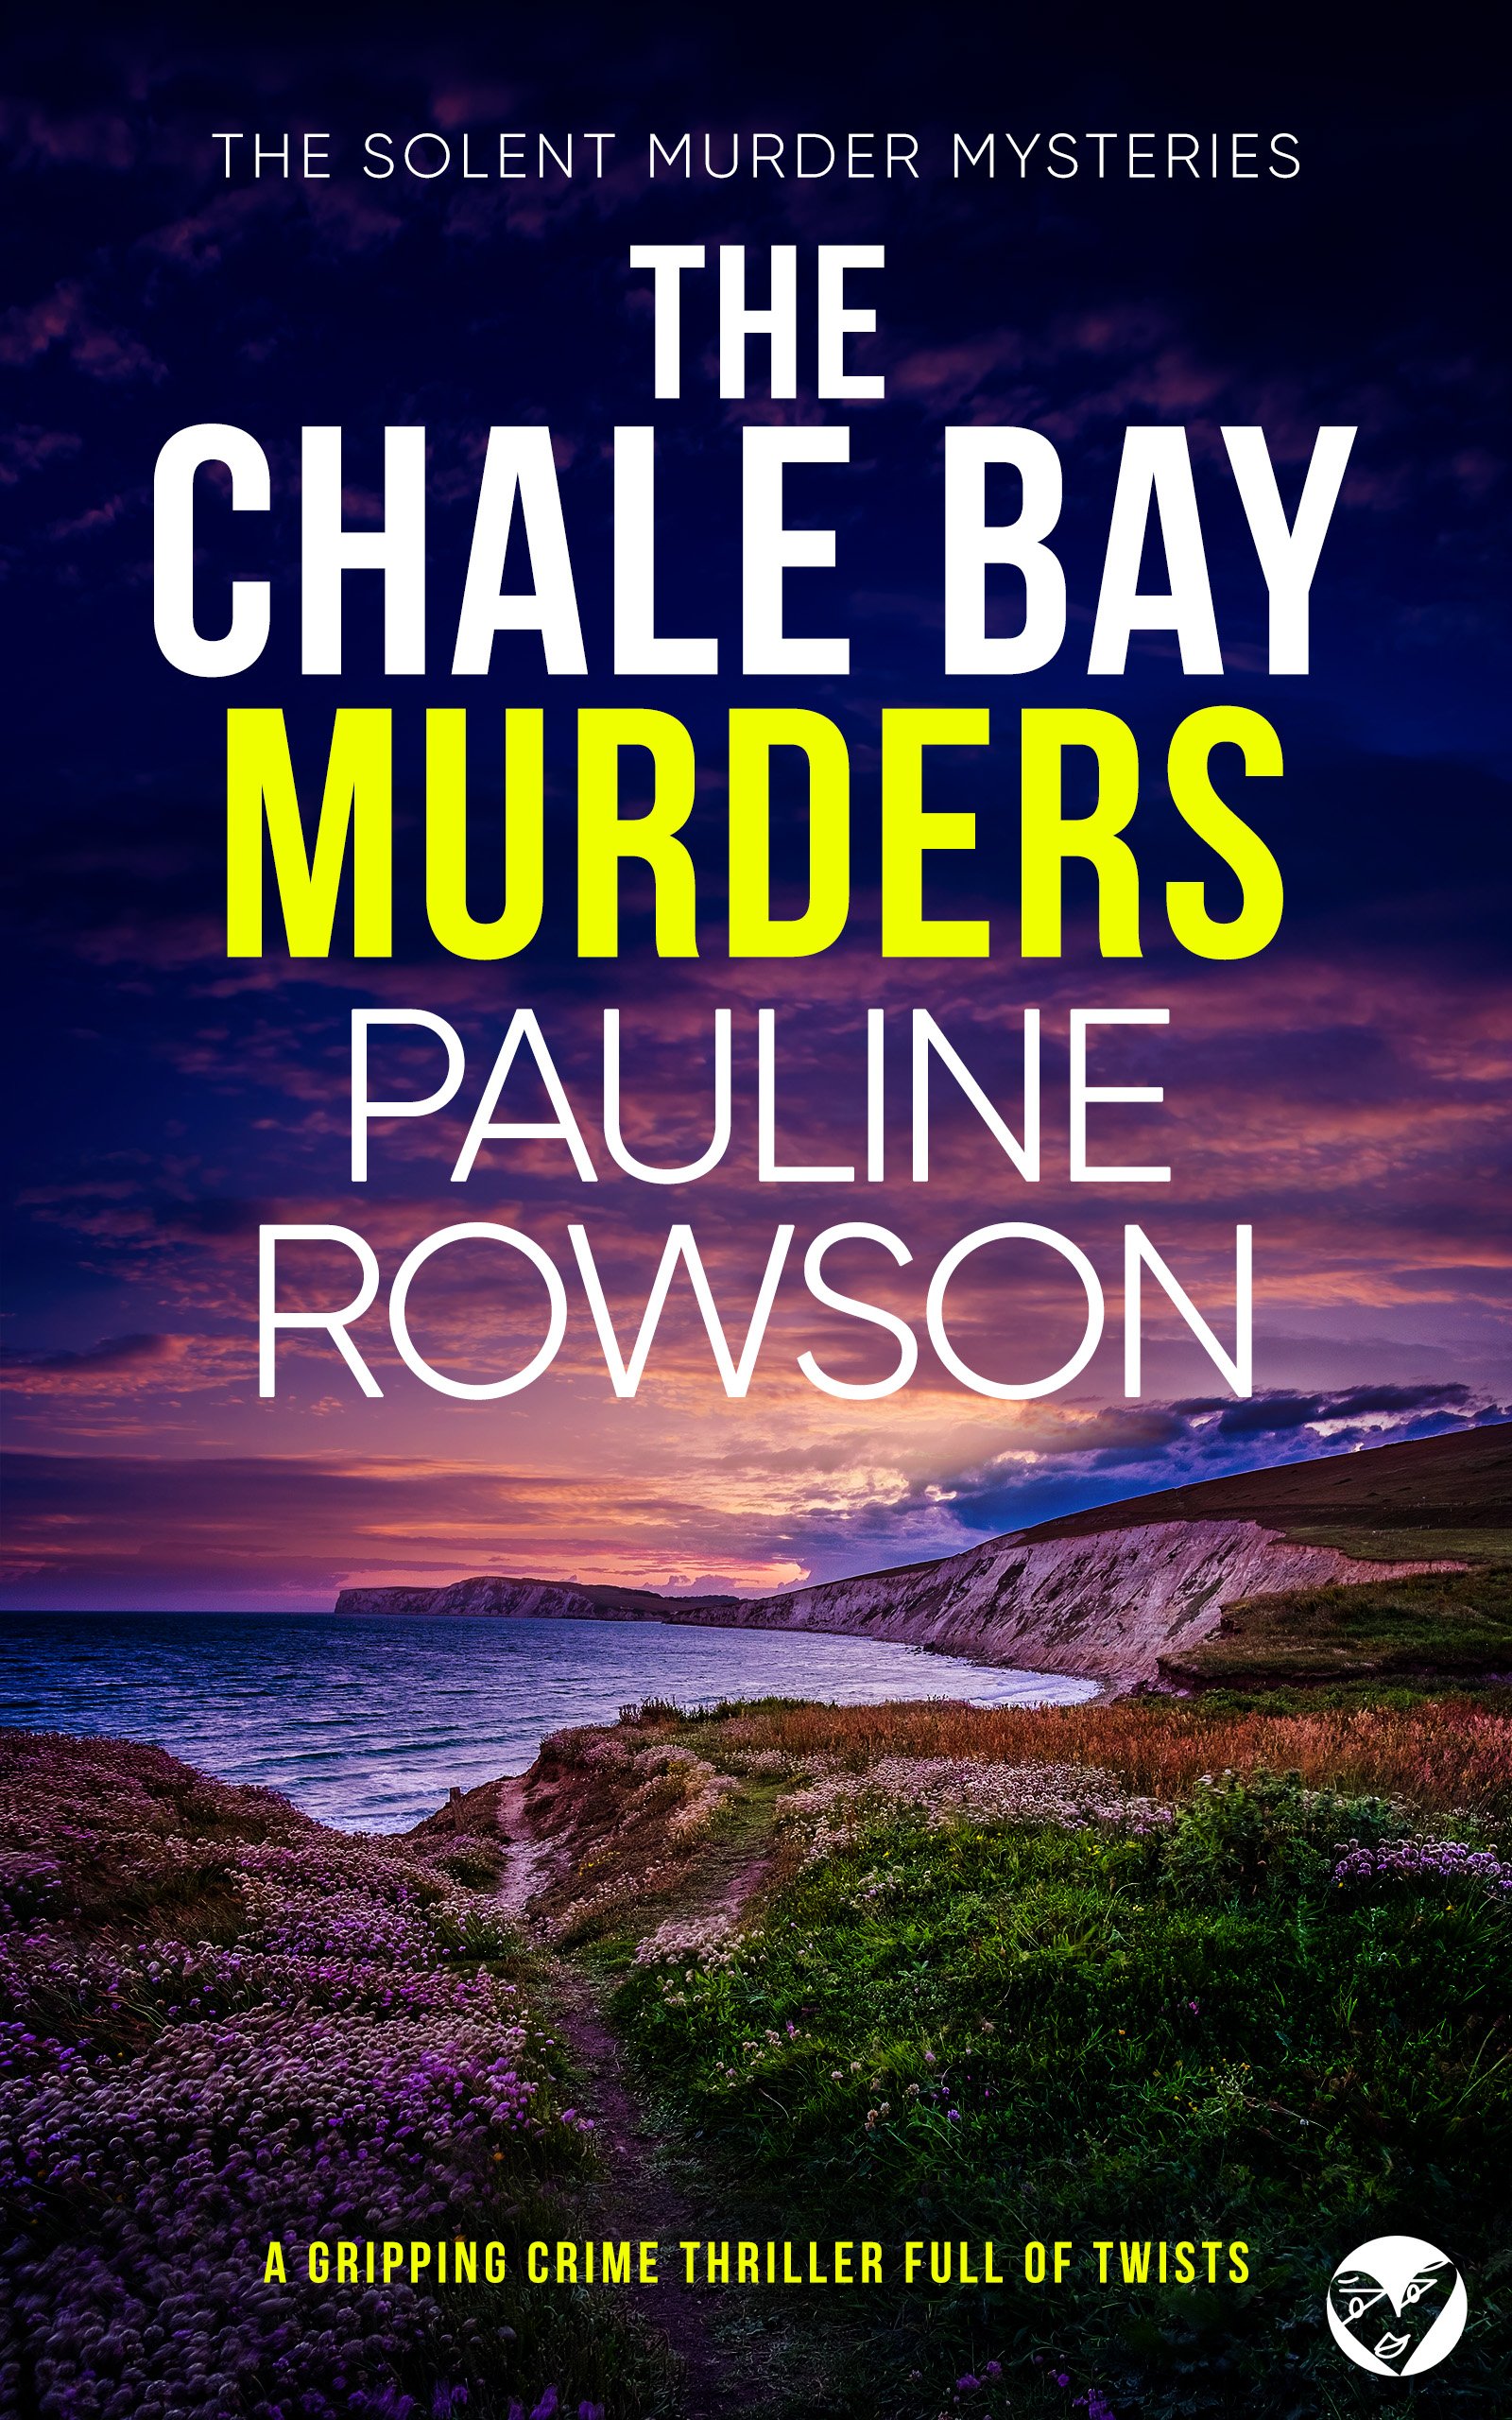 THE CHALE BAY MURDERS Cover publish.jpg